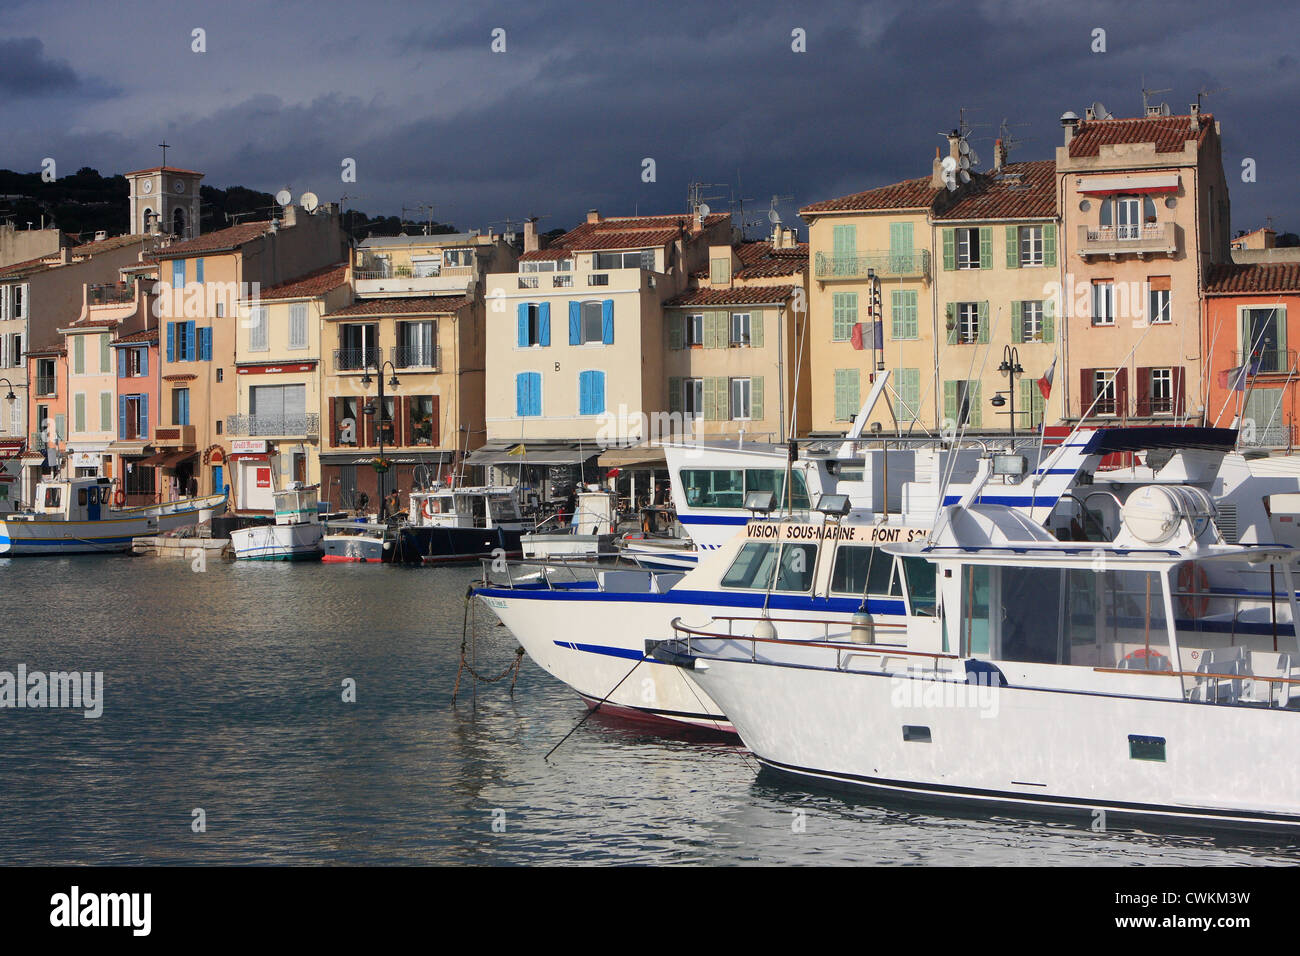 Port at Cassis, France Stock Photo - Alamy